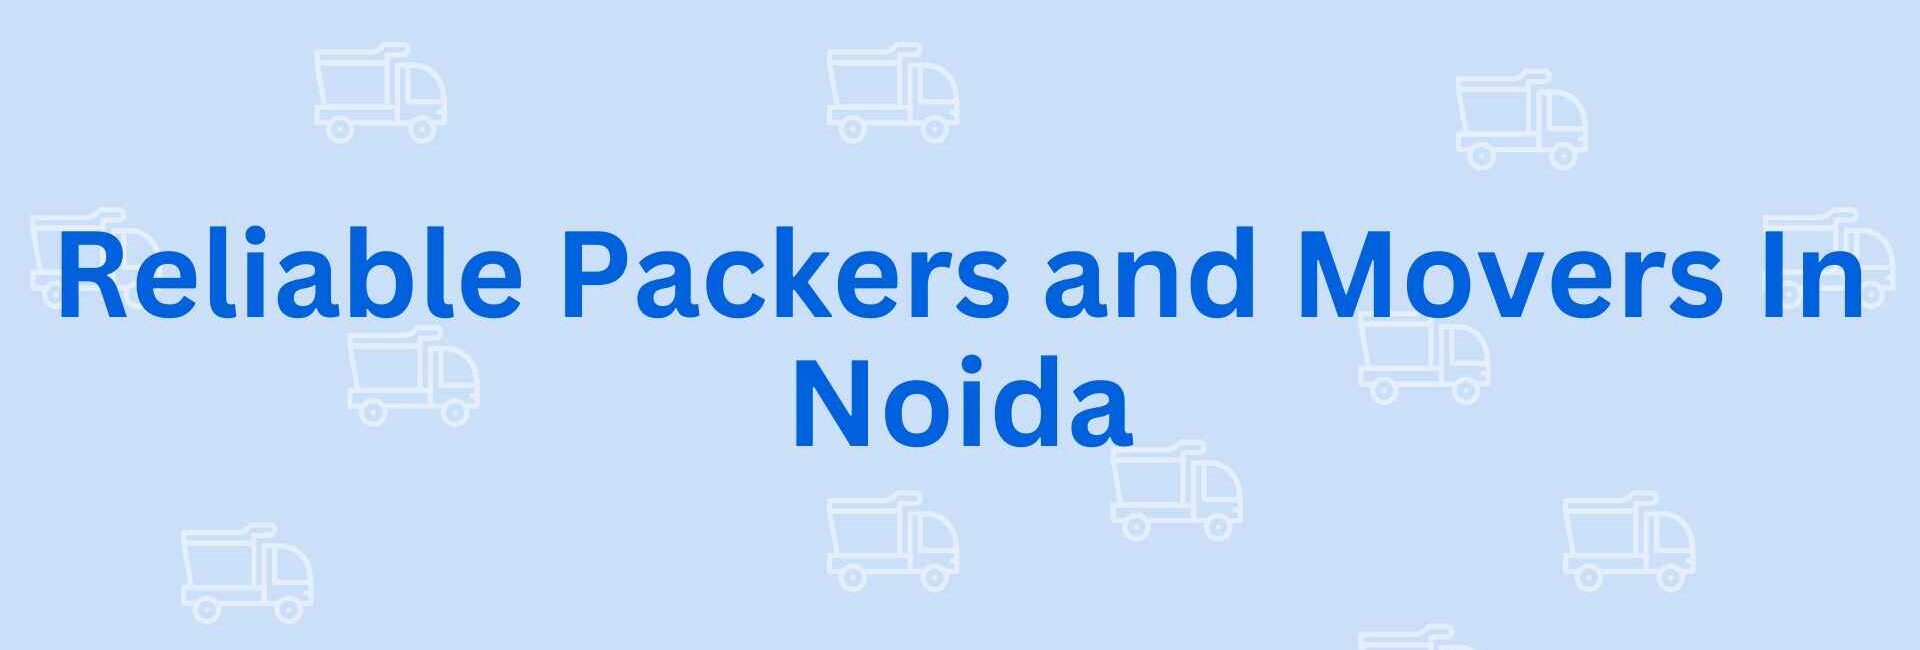 Reliable Packers and Movers In Noida - Packers and Movers in Noida